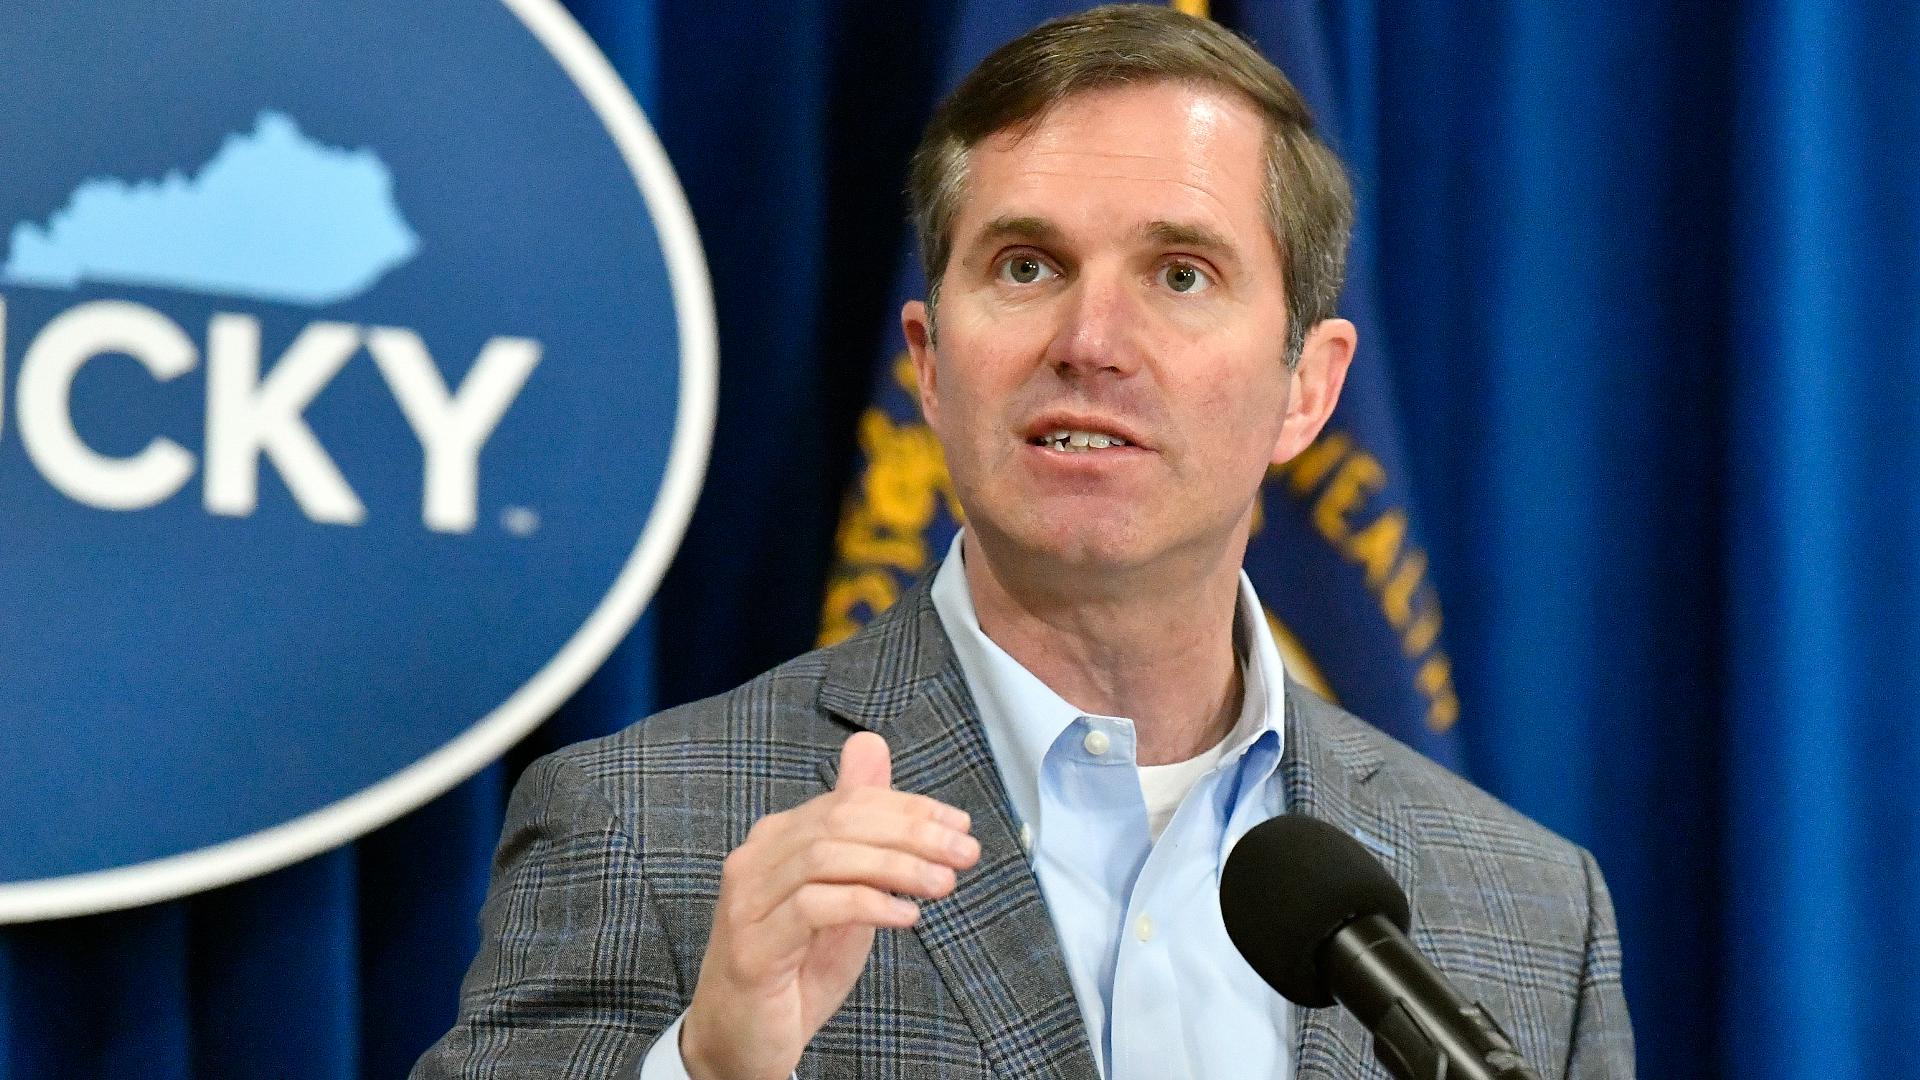 Beshear said it's "flattering" so many people think he should be the nominee if Biden steps aside.